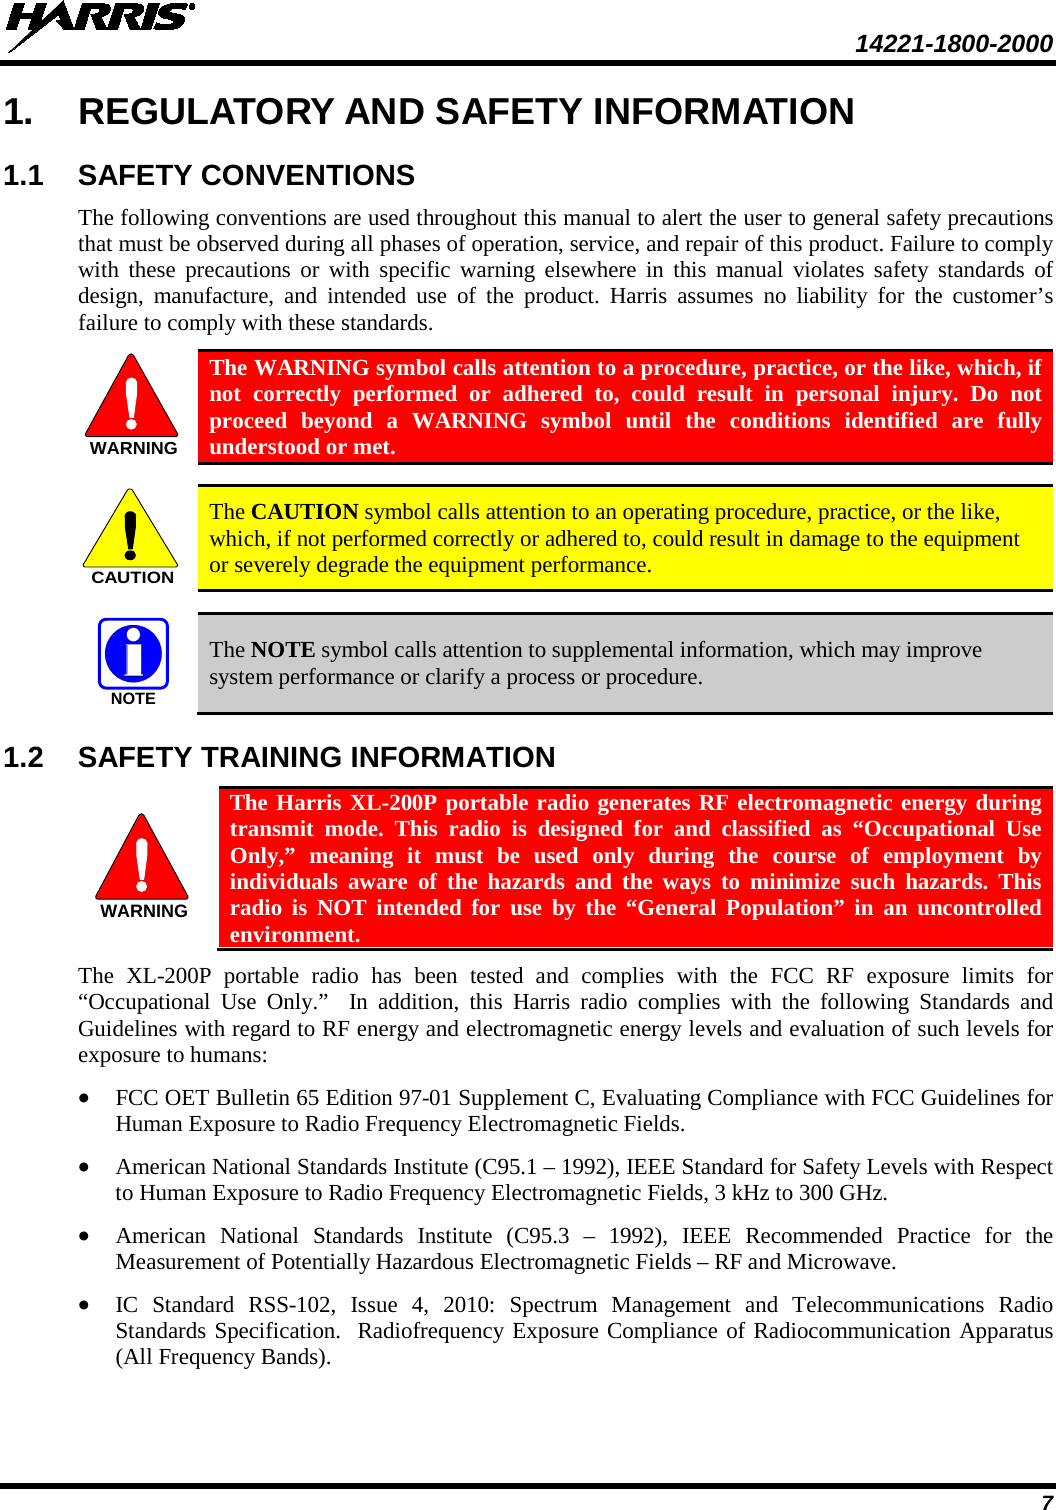  14221-1800-2000 7 1. REGULATORY AND SAFETY INFORMATION 1.1 SAFETY CONVENTIONS The following conventions are used throughout this manual to alert the user to general safety precautions that must be observed during all phases of operation, service, and repair of this product. Failure to comply with these precautions or with specific warning elsewhere in this manual violates safety standards of design, manufacture, and intended use of the product. Harris assumes no liability for the customer’s failure to comply with these standards.  The WARNING symbol calls attention to a procedure, practice, or the like, which, if not correctly performed or adhered to, could result in personal injury. Do not proceed beyond a WARNING symbol until the conditions identified are fully understood or met.    The CAUTION symbol calls attention to an operating procedure, practice, or the like, which, if not performed correctly or adhered to, could result in damage to the equipment or severely degrade the equipment performance.    The NOTE symbol calls attention to supplemental information, which may improve system performance or clarify a process or procedure. 1.2 SAFETY TRAINING INFORMATION  The Harris XL-200P portable radio generates RF electromagnetic energy during transmit mode. This radio is designed for and classified as “Occupational Use Only,” meaning it must be used only during the course of employment by individuals aware of the hazards and the ways to minimize such hazards. This radio is NOT intended for use by the “General Population” in an uncontrolled environment. The XL-200P portable radio has been tested and complies with the FCC RF exposure limits for “Occupational Use Only.”  In addition, this Harris radio complies with the following Standards and Guidelines with regard to RF energy and electromagnetic energy levels and evaluation of such levels for exposure to humans: • FCC OET Bulletin 65 Edition 97-01 Supplement C, Evaluating Compliance with FCC Guidelines for Human Exposure to Radio Frequency Electromagnetic Fields. • American National Standards Institute (C95.1 – 1992), IEEE Standard for Safety Levels with Respect to Human Exposure to Radio Frequency Electromagnetic Fields, 3 kHz to 300 GHz. • American National Standards Institute (C95.3 –  1992), IEEE Recommended Practice for the Measurement of Potentially Hazardous Electromagnetic Fields – RF and Microwave. • IC Standard RSS-102, Issue 4,  2010: Spectrum Management and Telecommunications Radio Standards Specification.  Radiofrequency Exposure Compliance of Radiocommunication Apparatus (All Frequency Bands). WARNINGCAUTIONNOTEWARNING